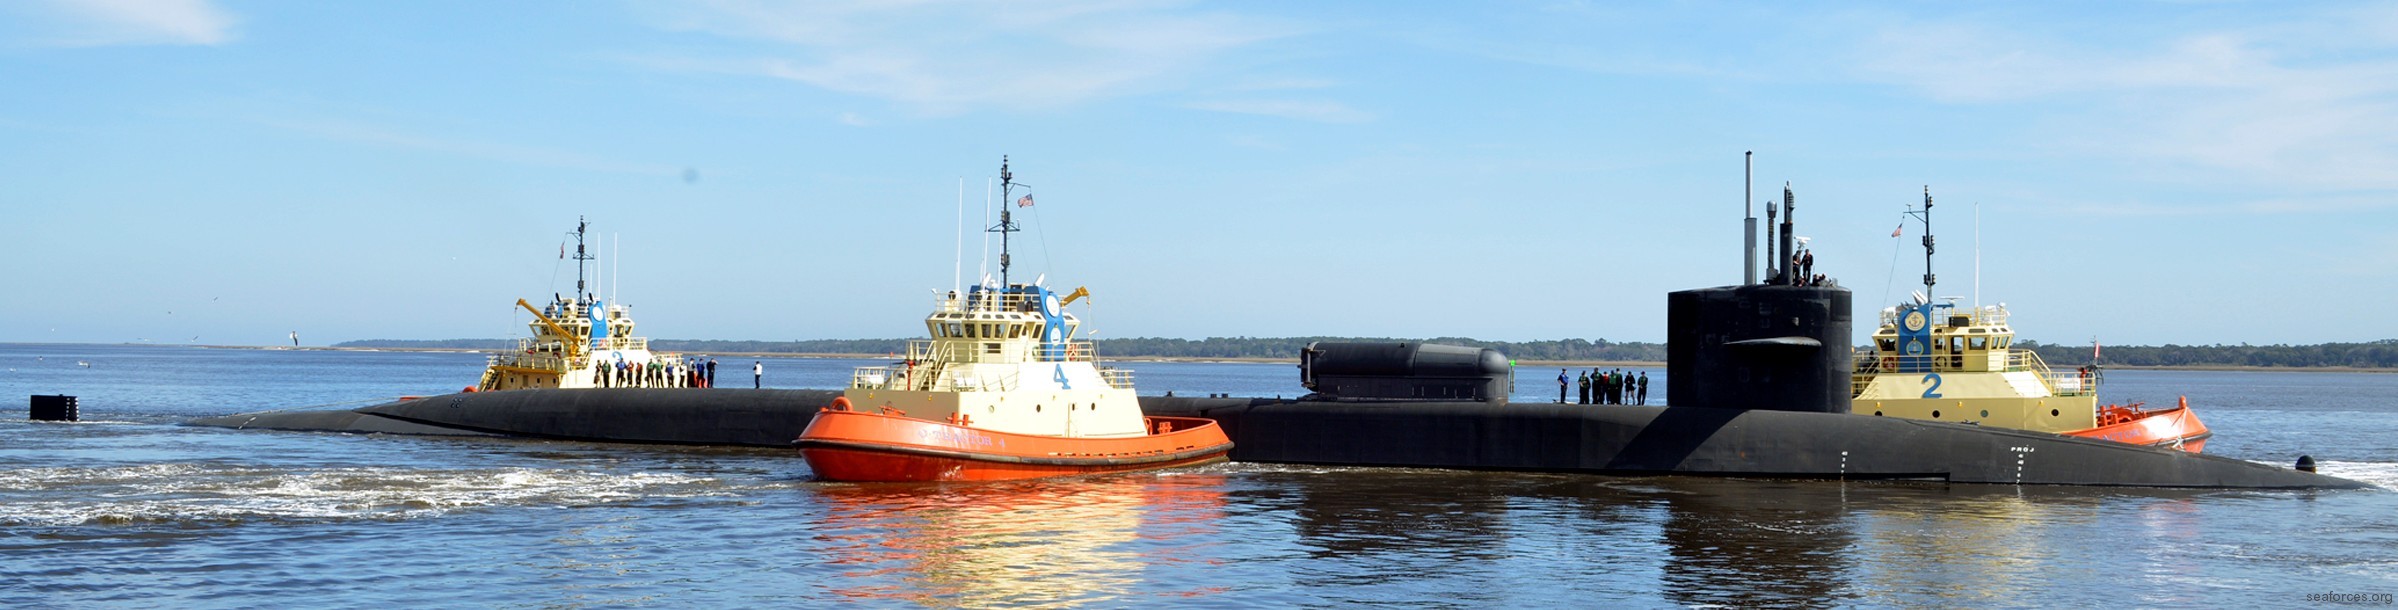 ssgn-729 uss georgia guided missile submarine 2016 02 kings bay